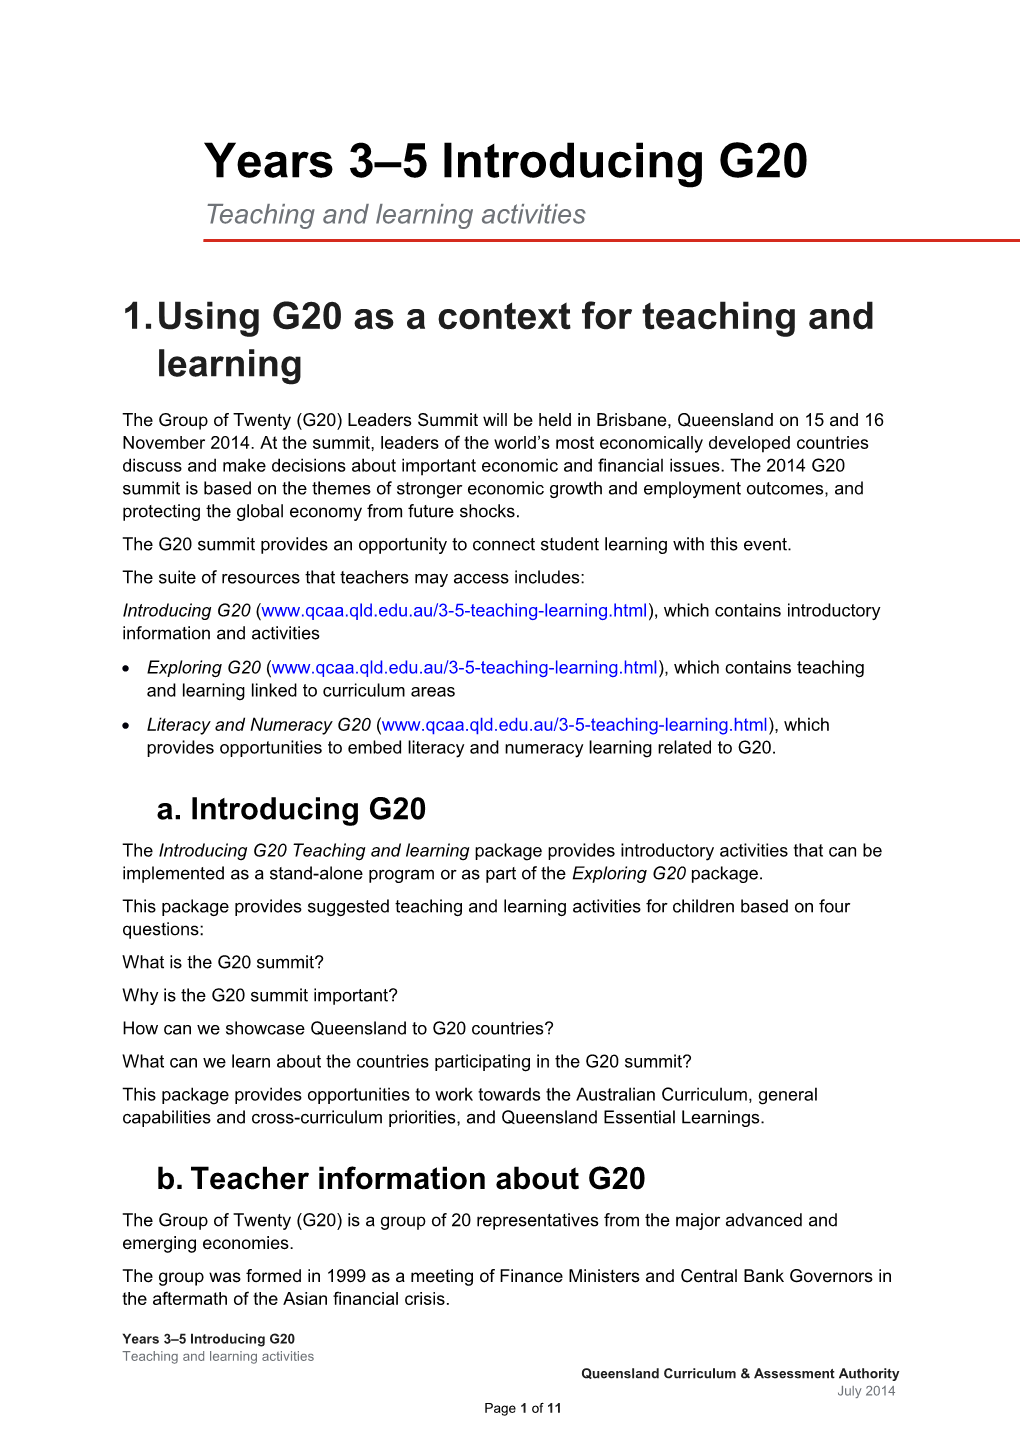 QCAA 3-5 Introducing G20 Teaching and Learning Resource